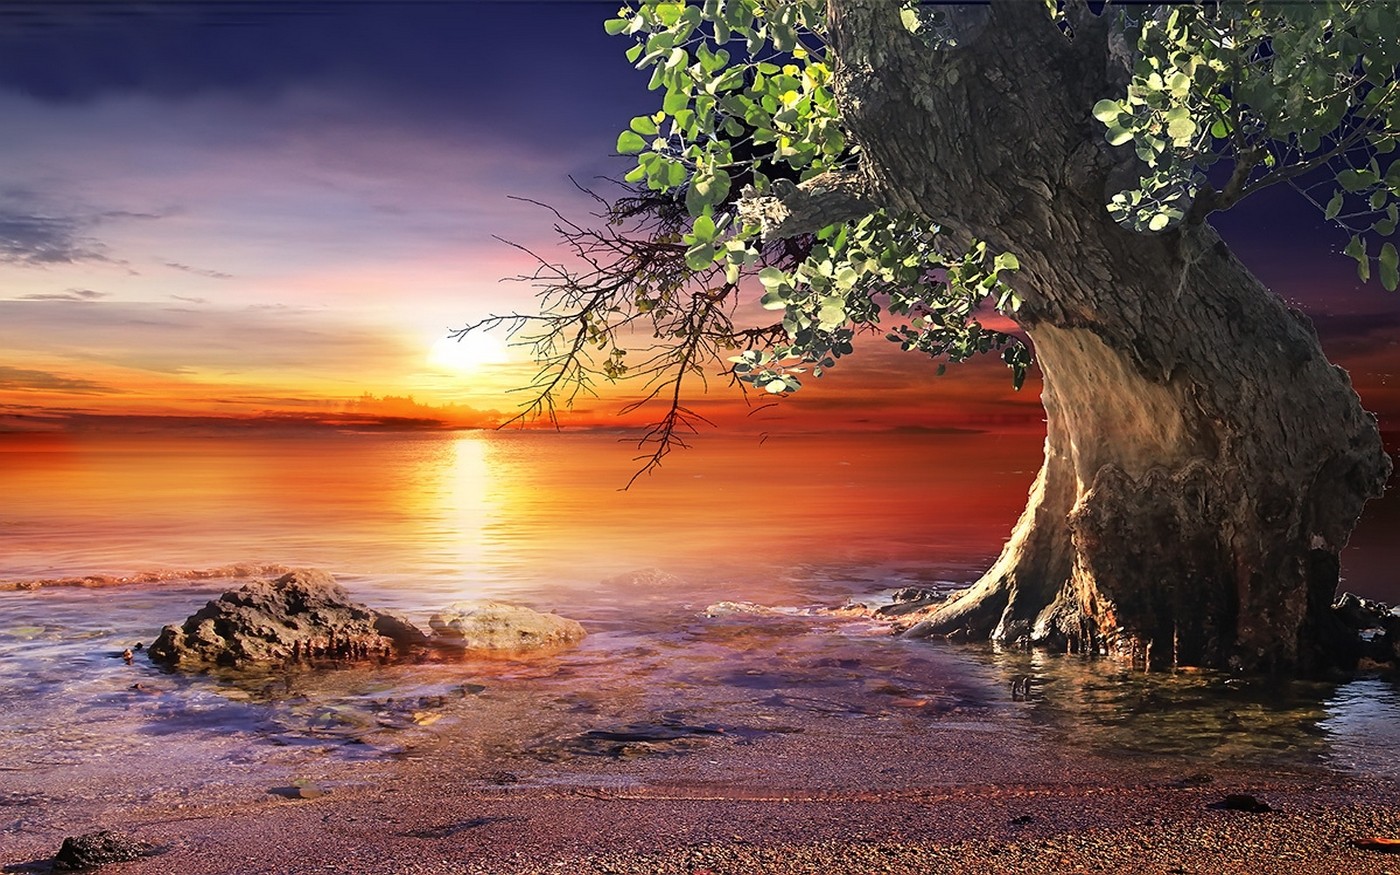 General 1400x875 nature sunset beach trees sea sky water colorful